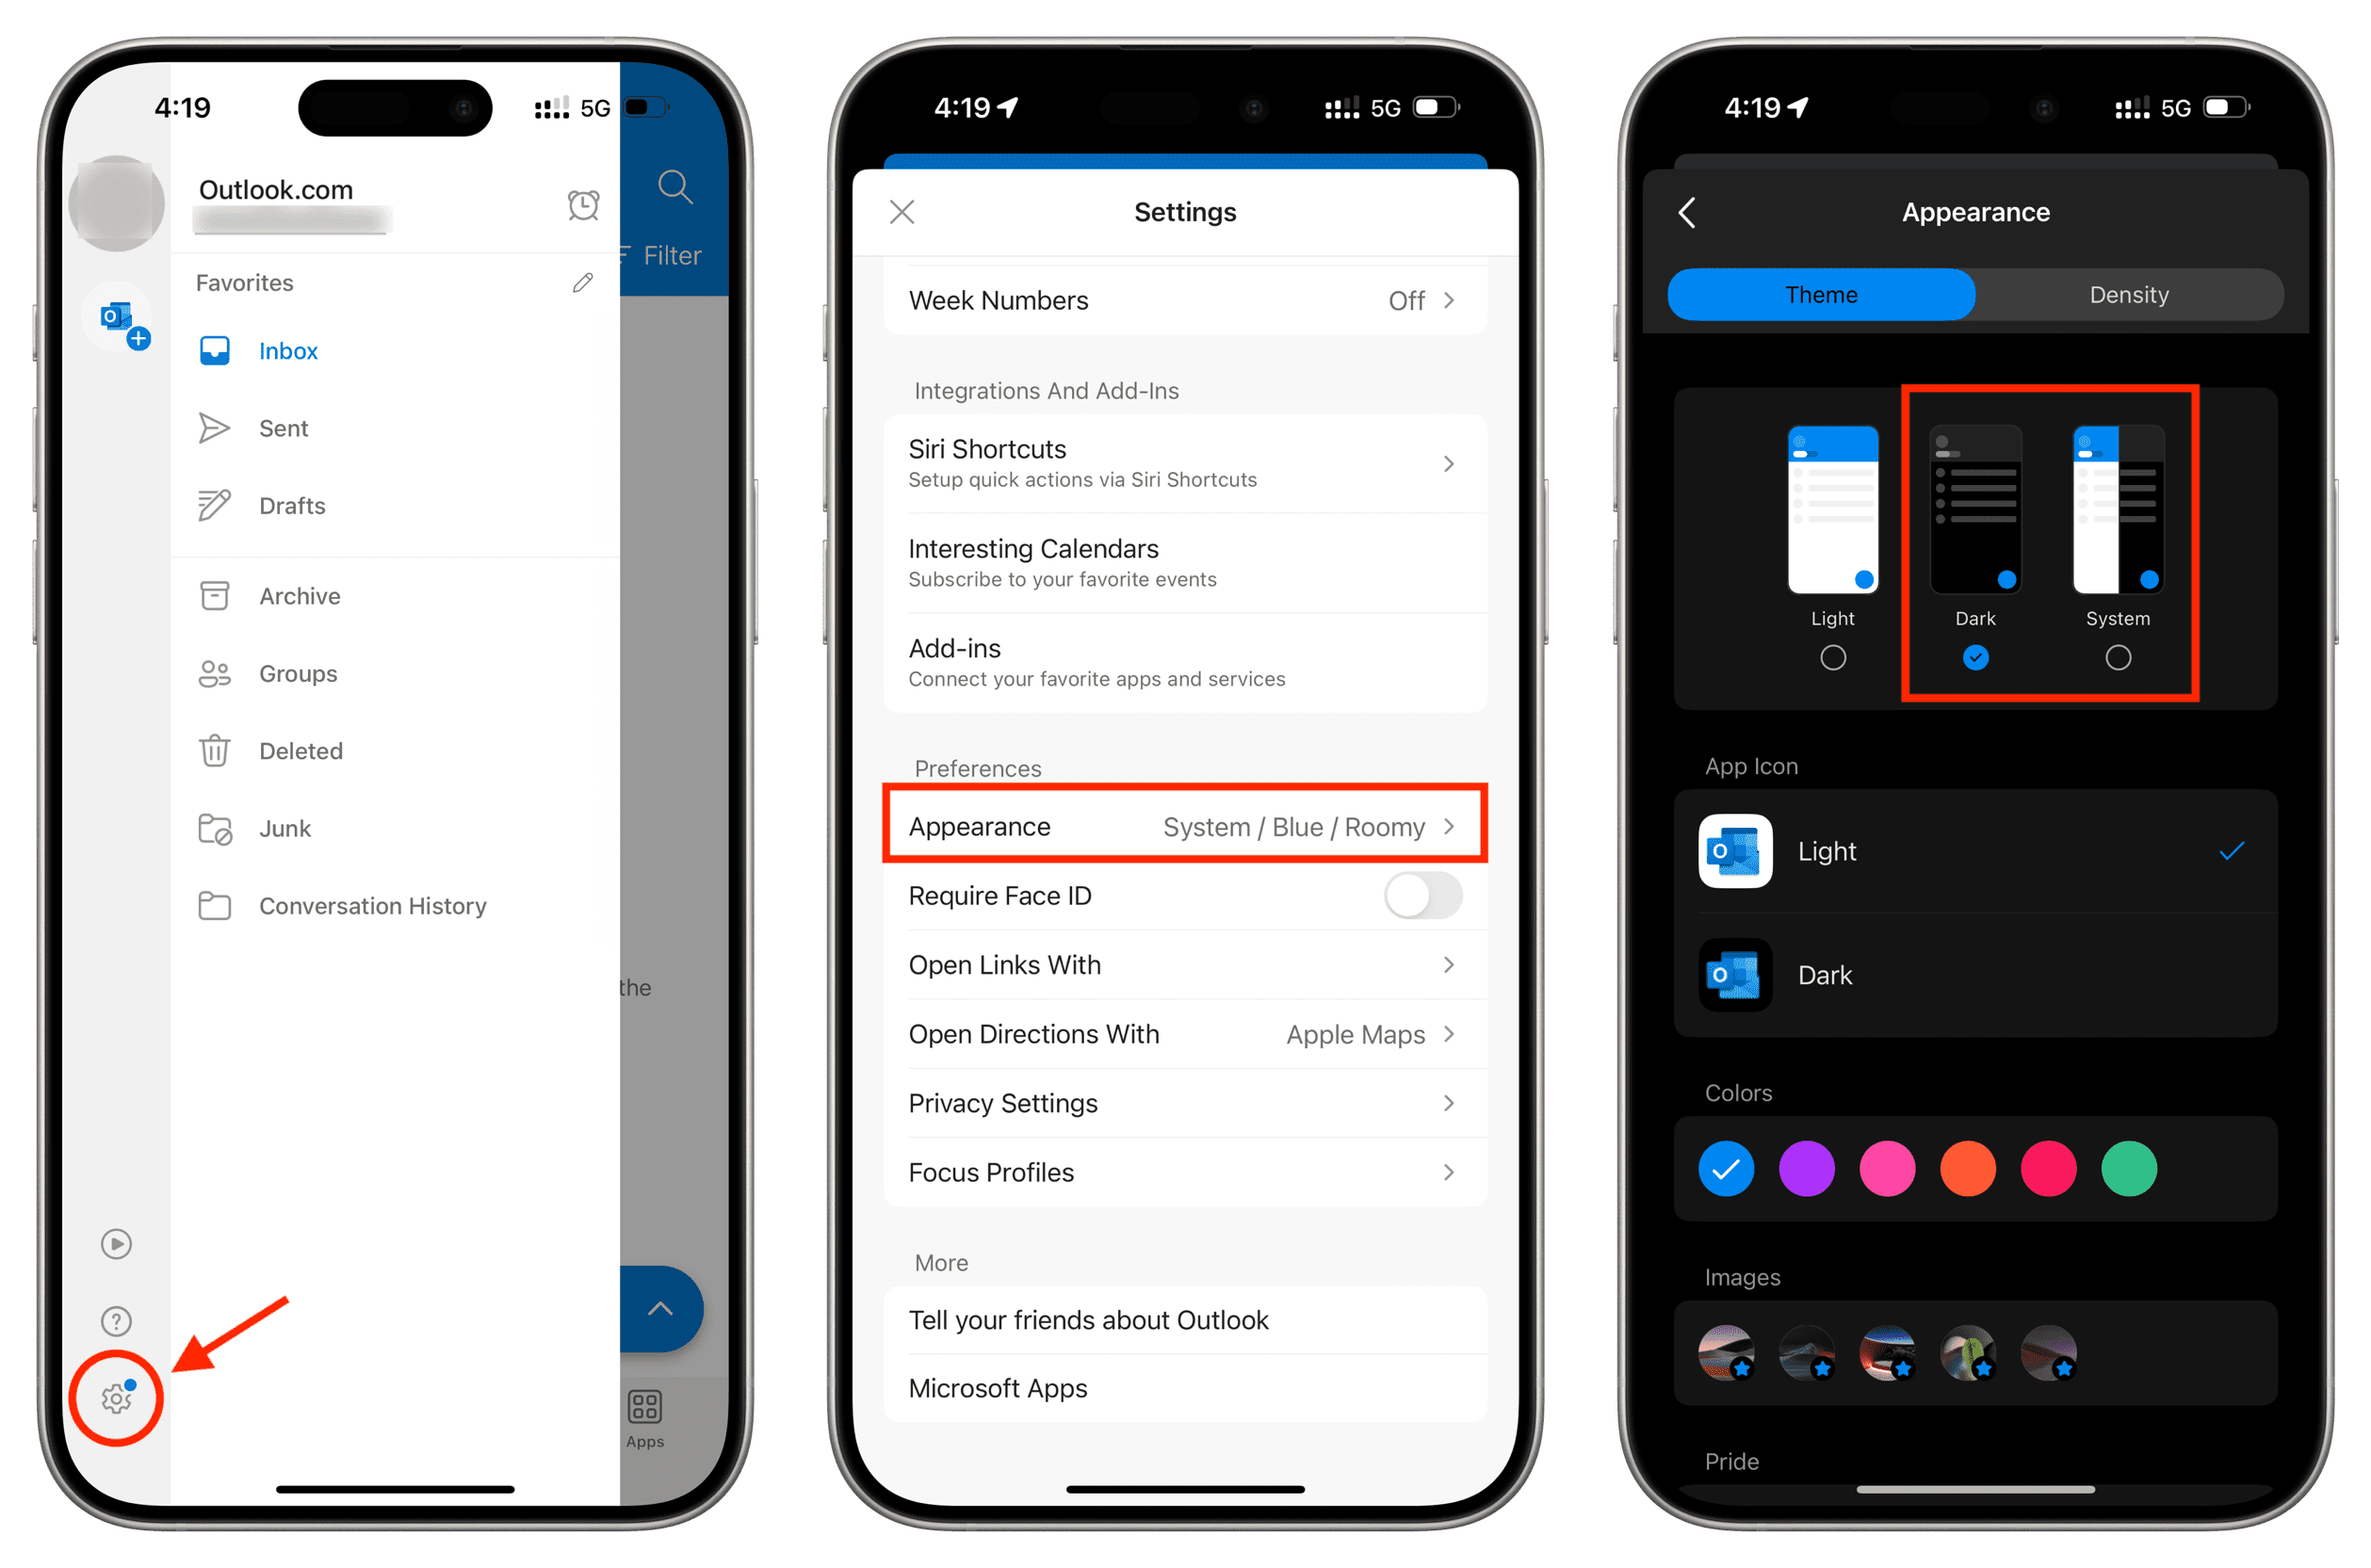 Turn on Dark Mode for Outlook on iPhone